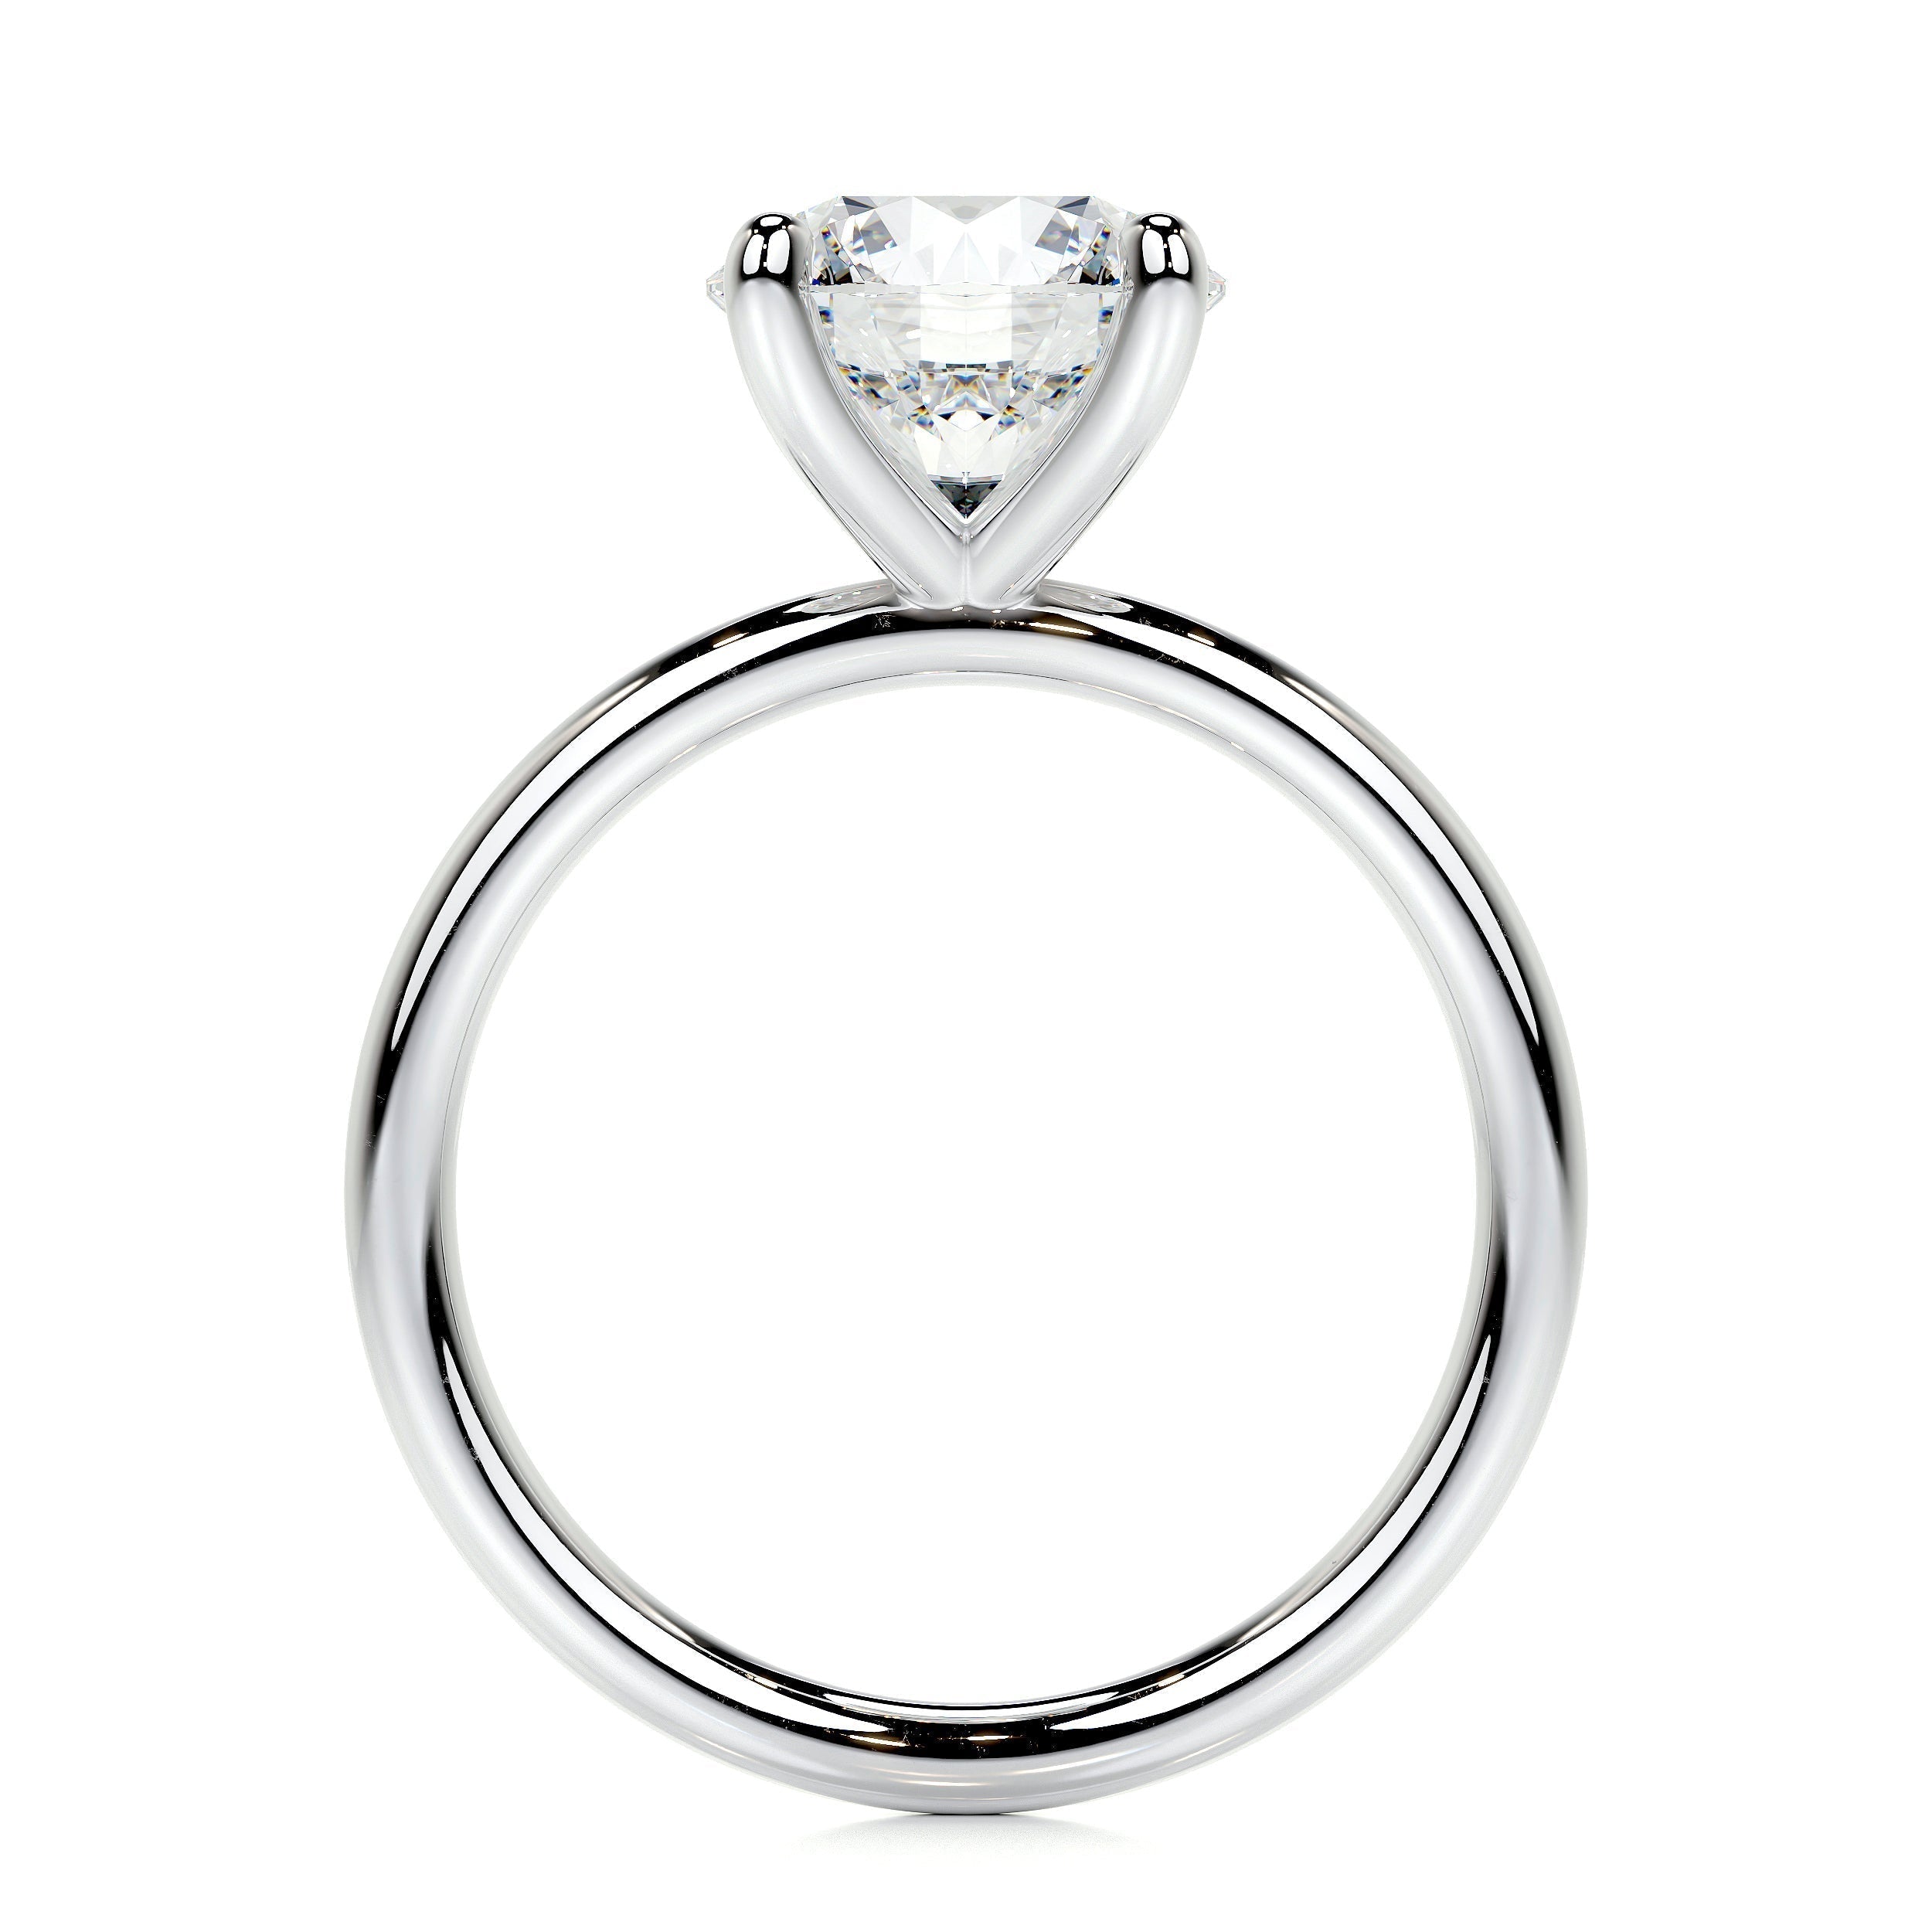 2.0 CT Round Solitaire CVD E/VS2 Diamond Engagement Ring 5